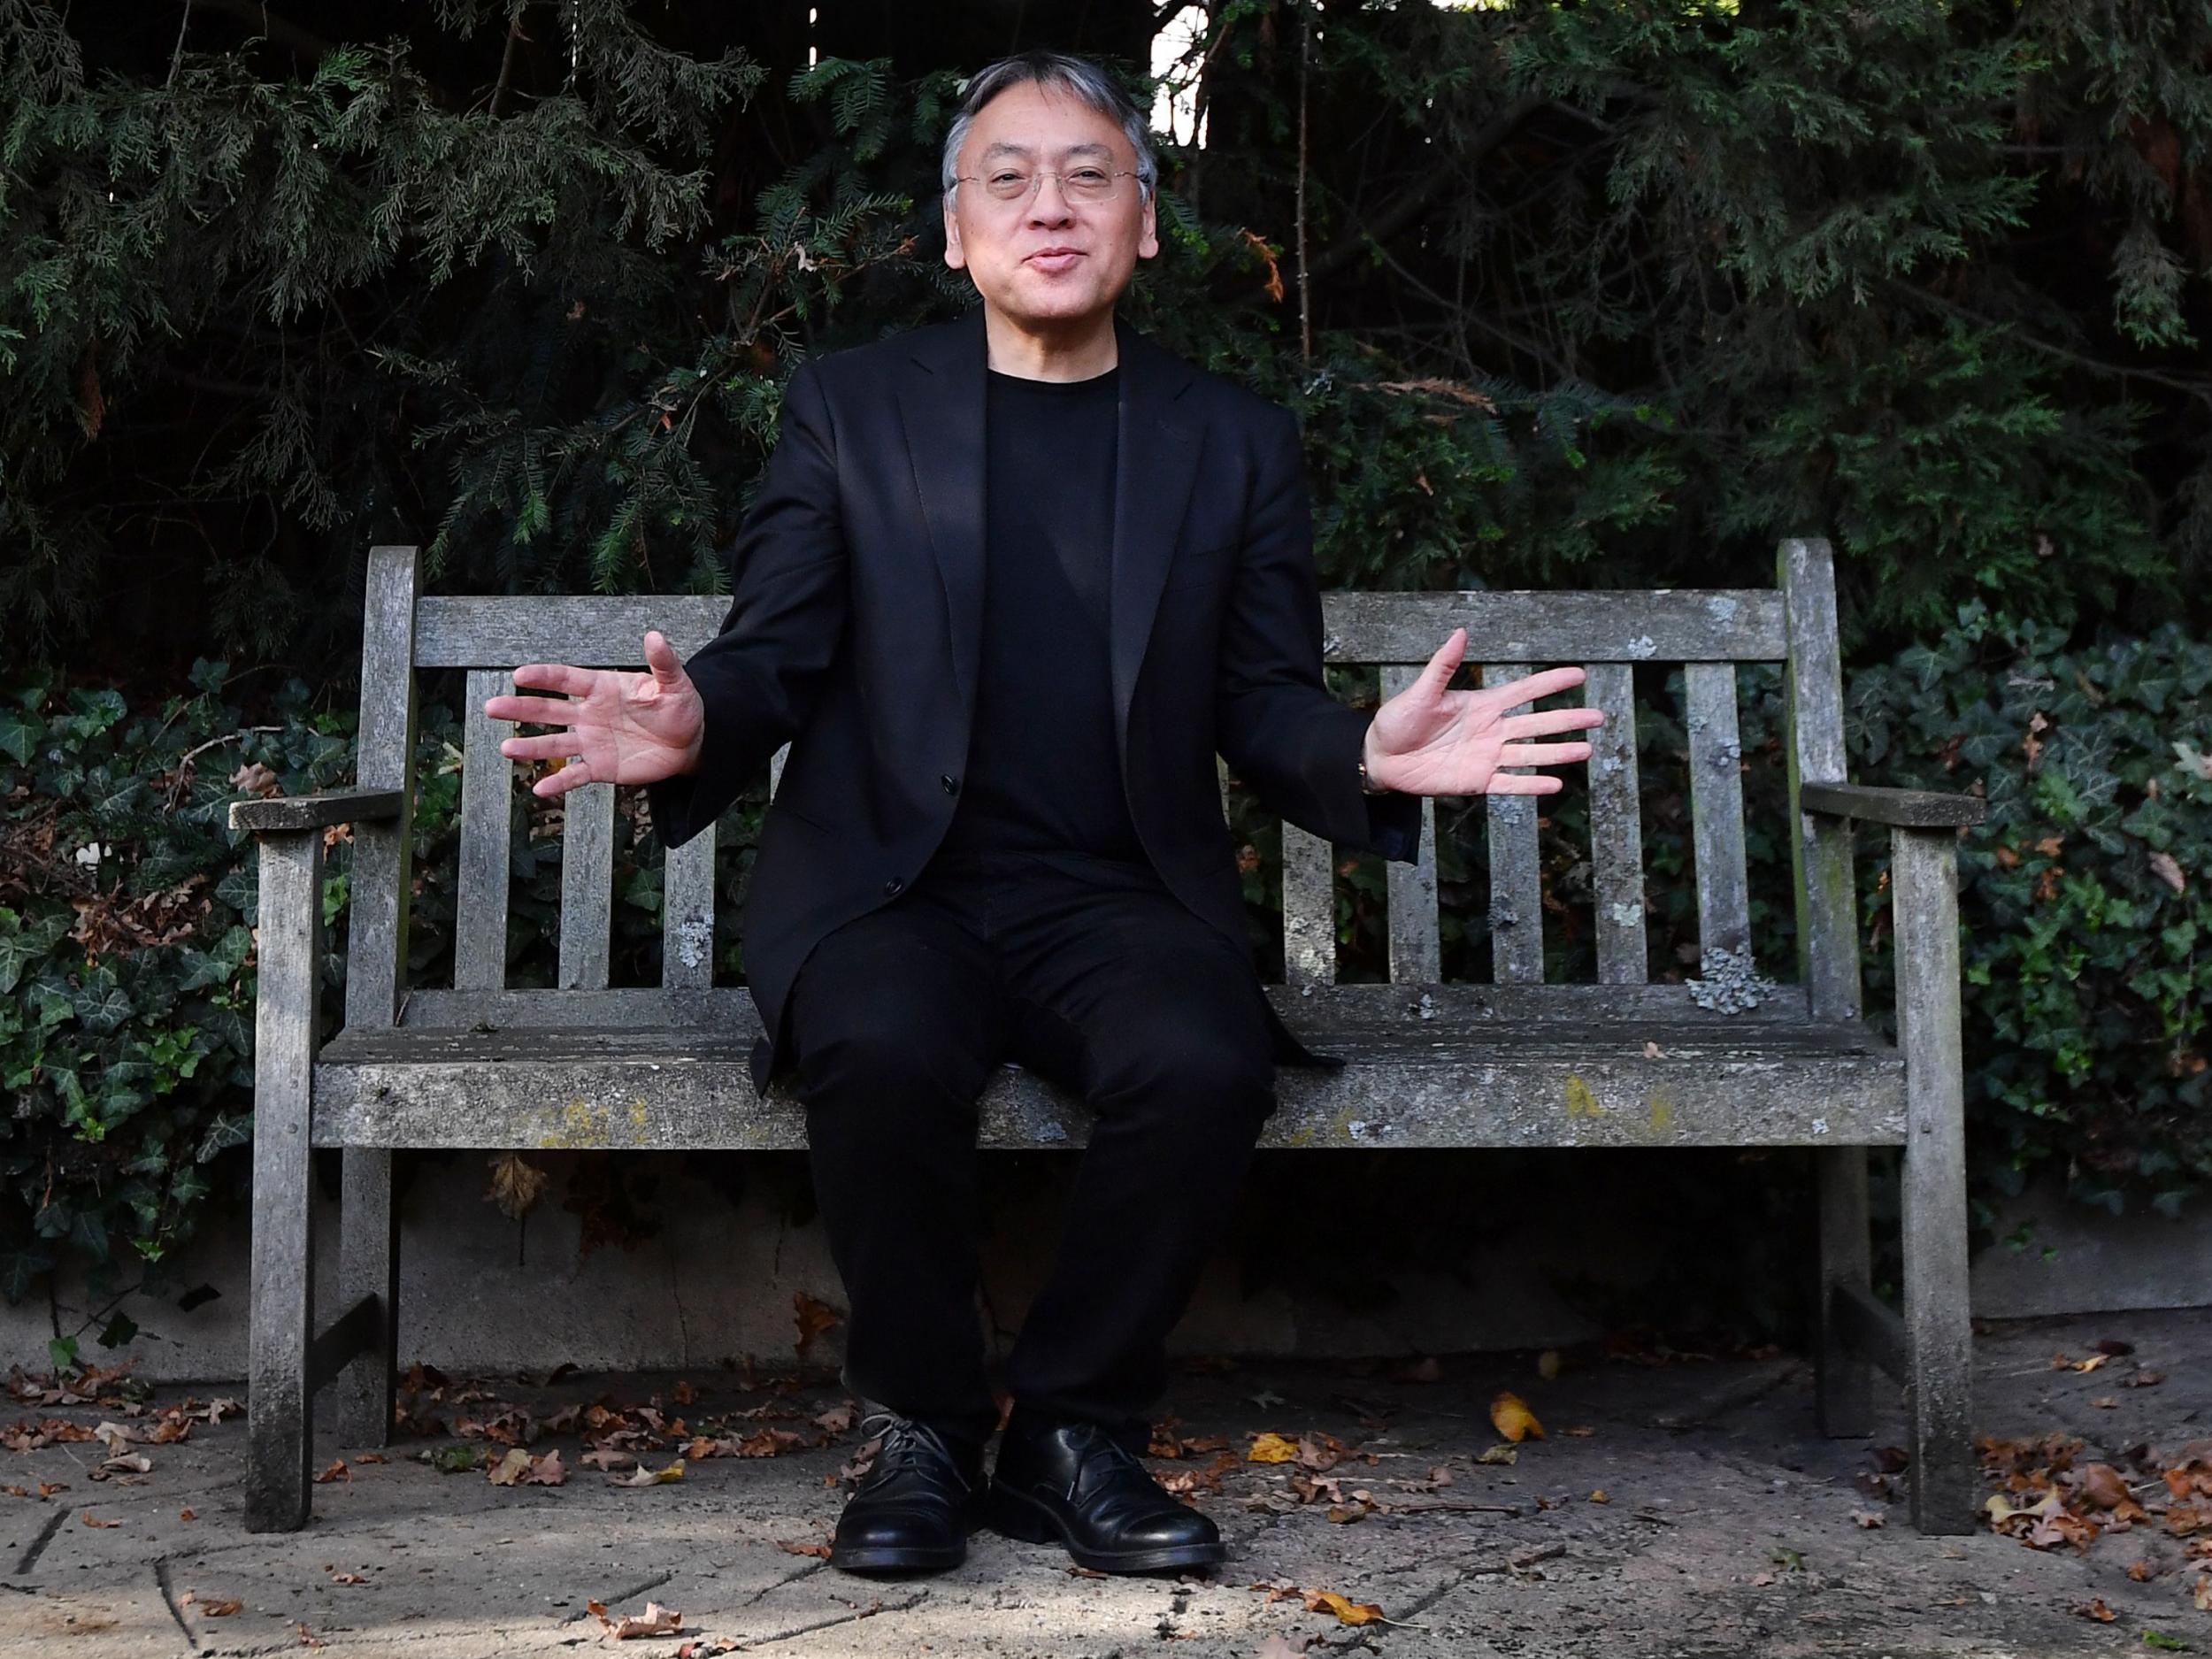 There remains a certain metaphysical dreaminess to Ishiguro’s writing